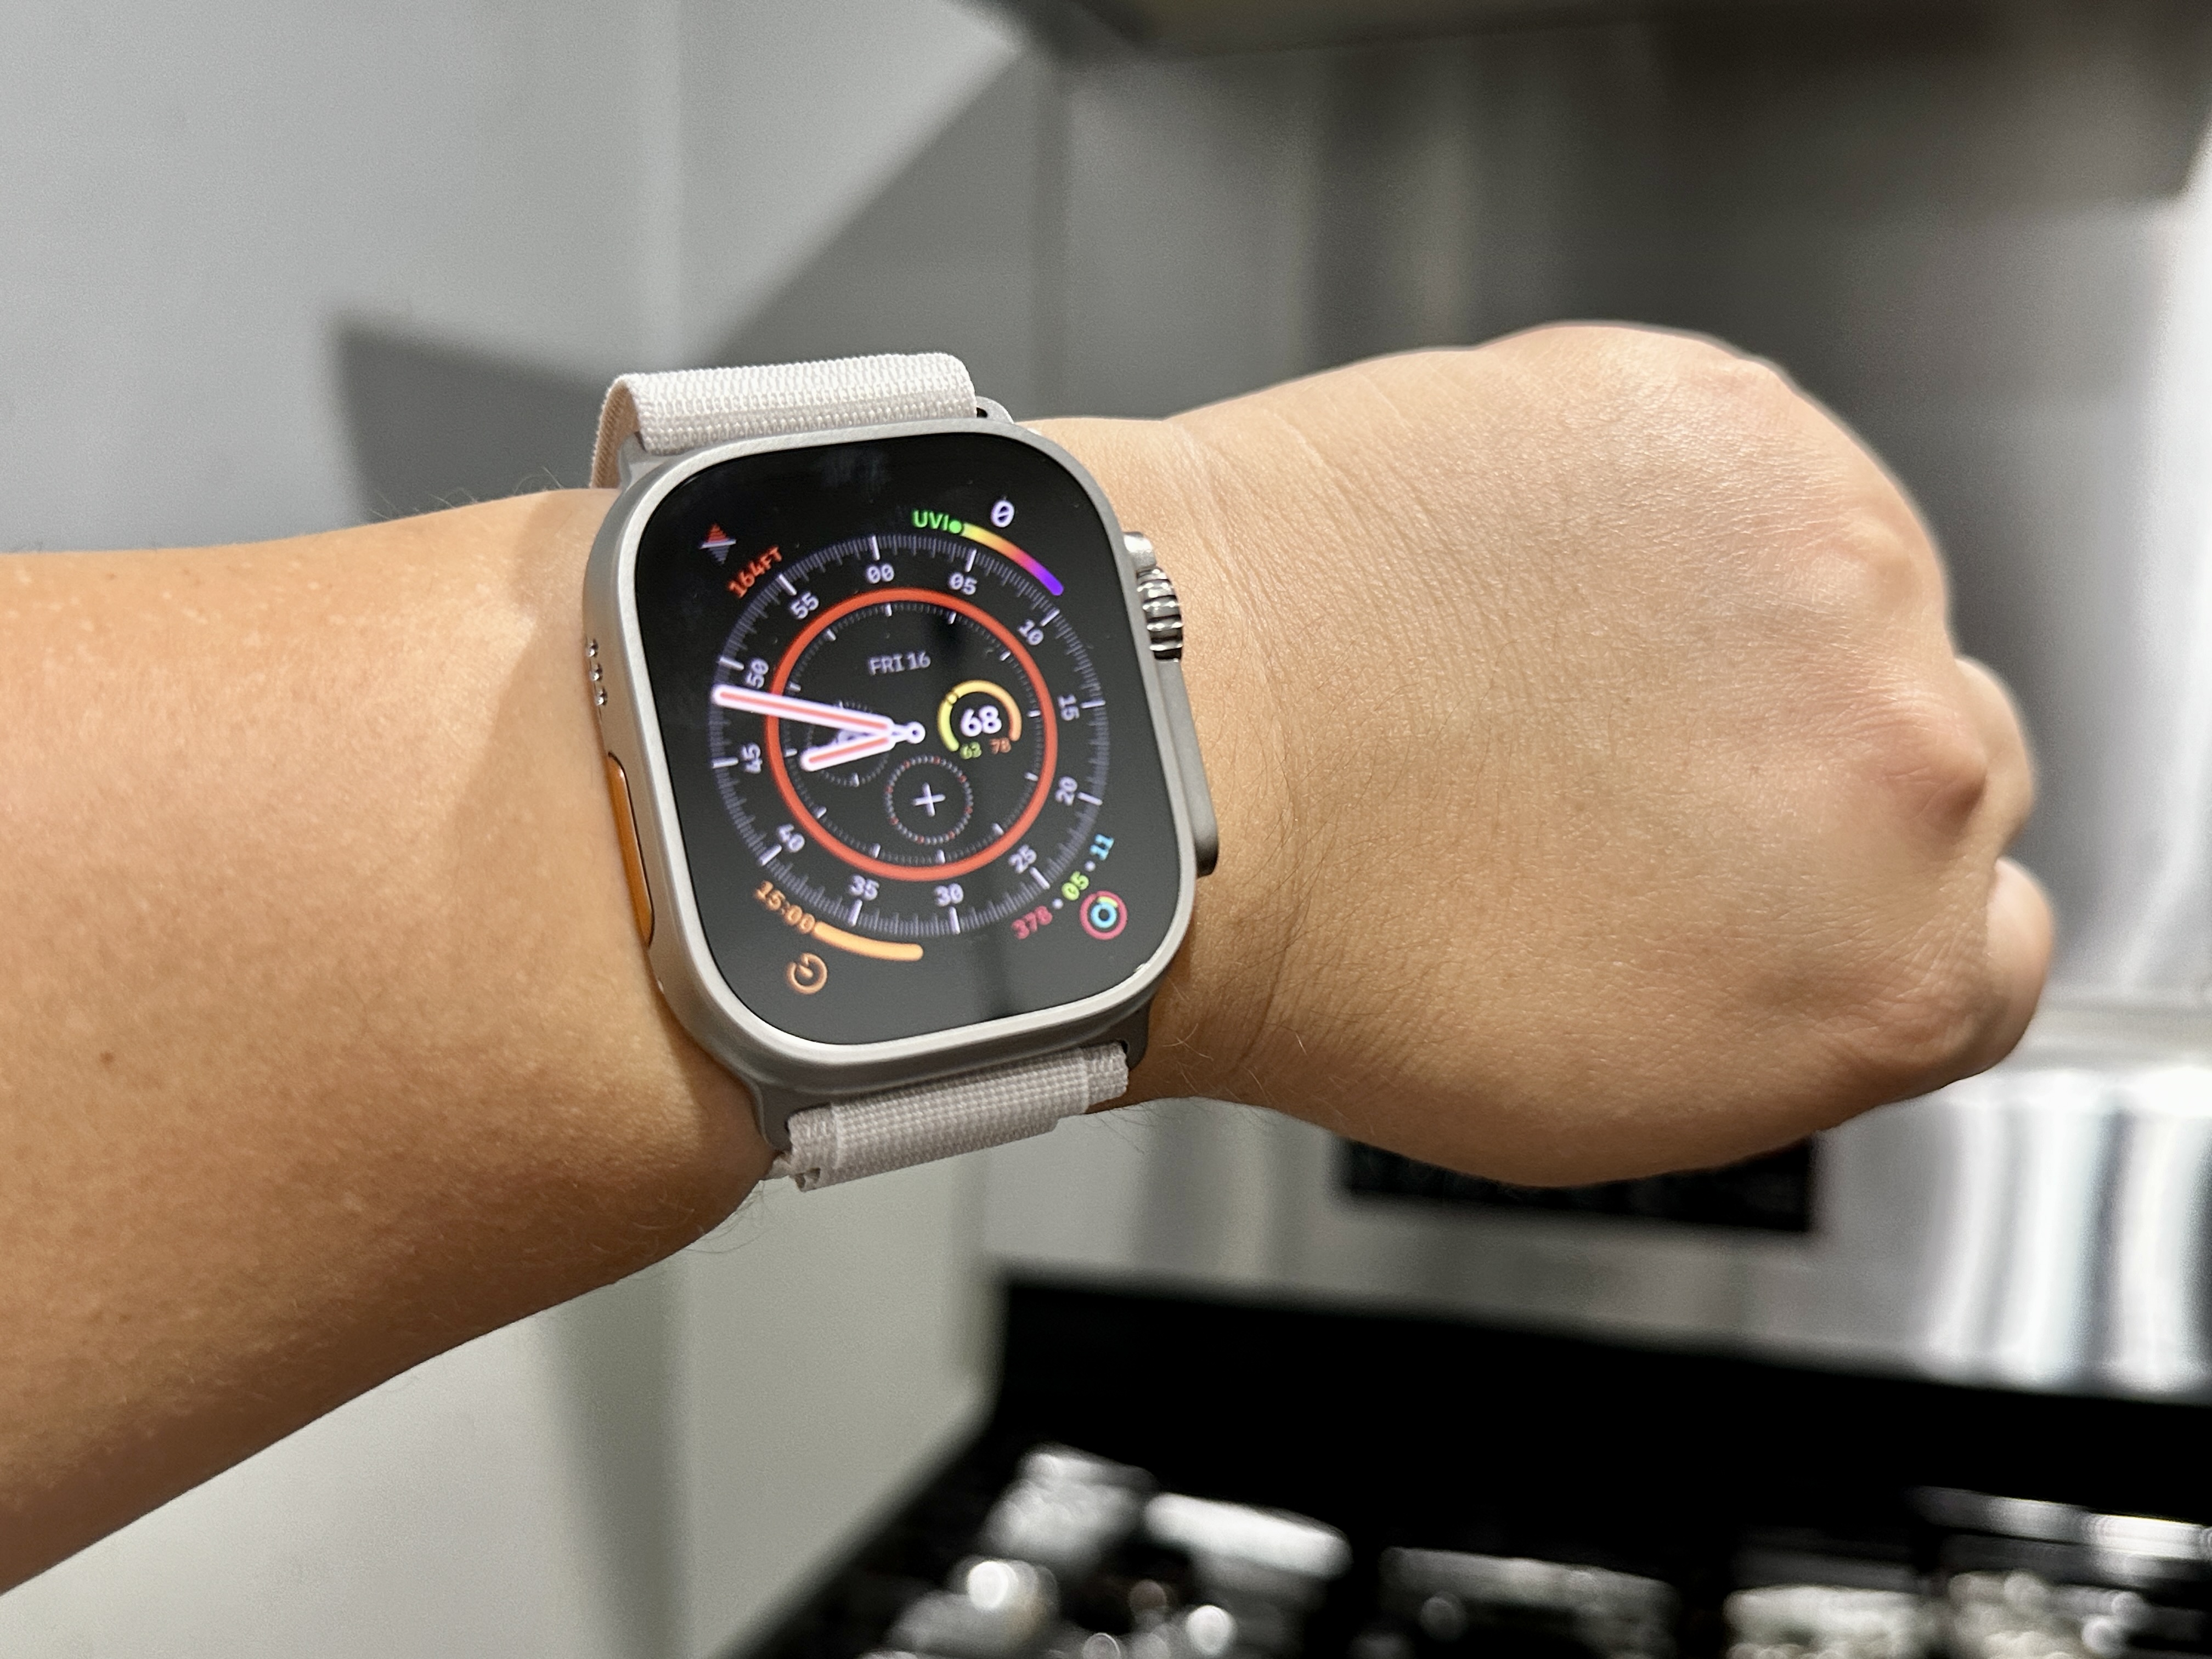 I finally got an Apple Watch Ultra. Here are 3 ways it surprised